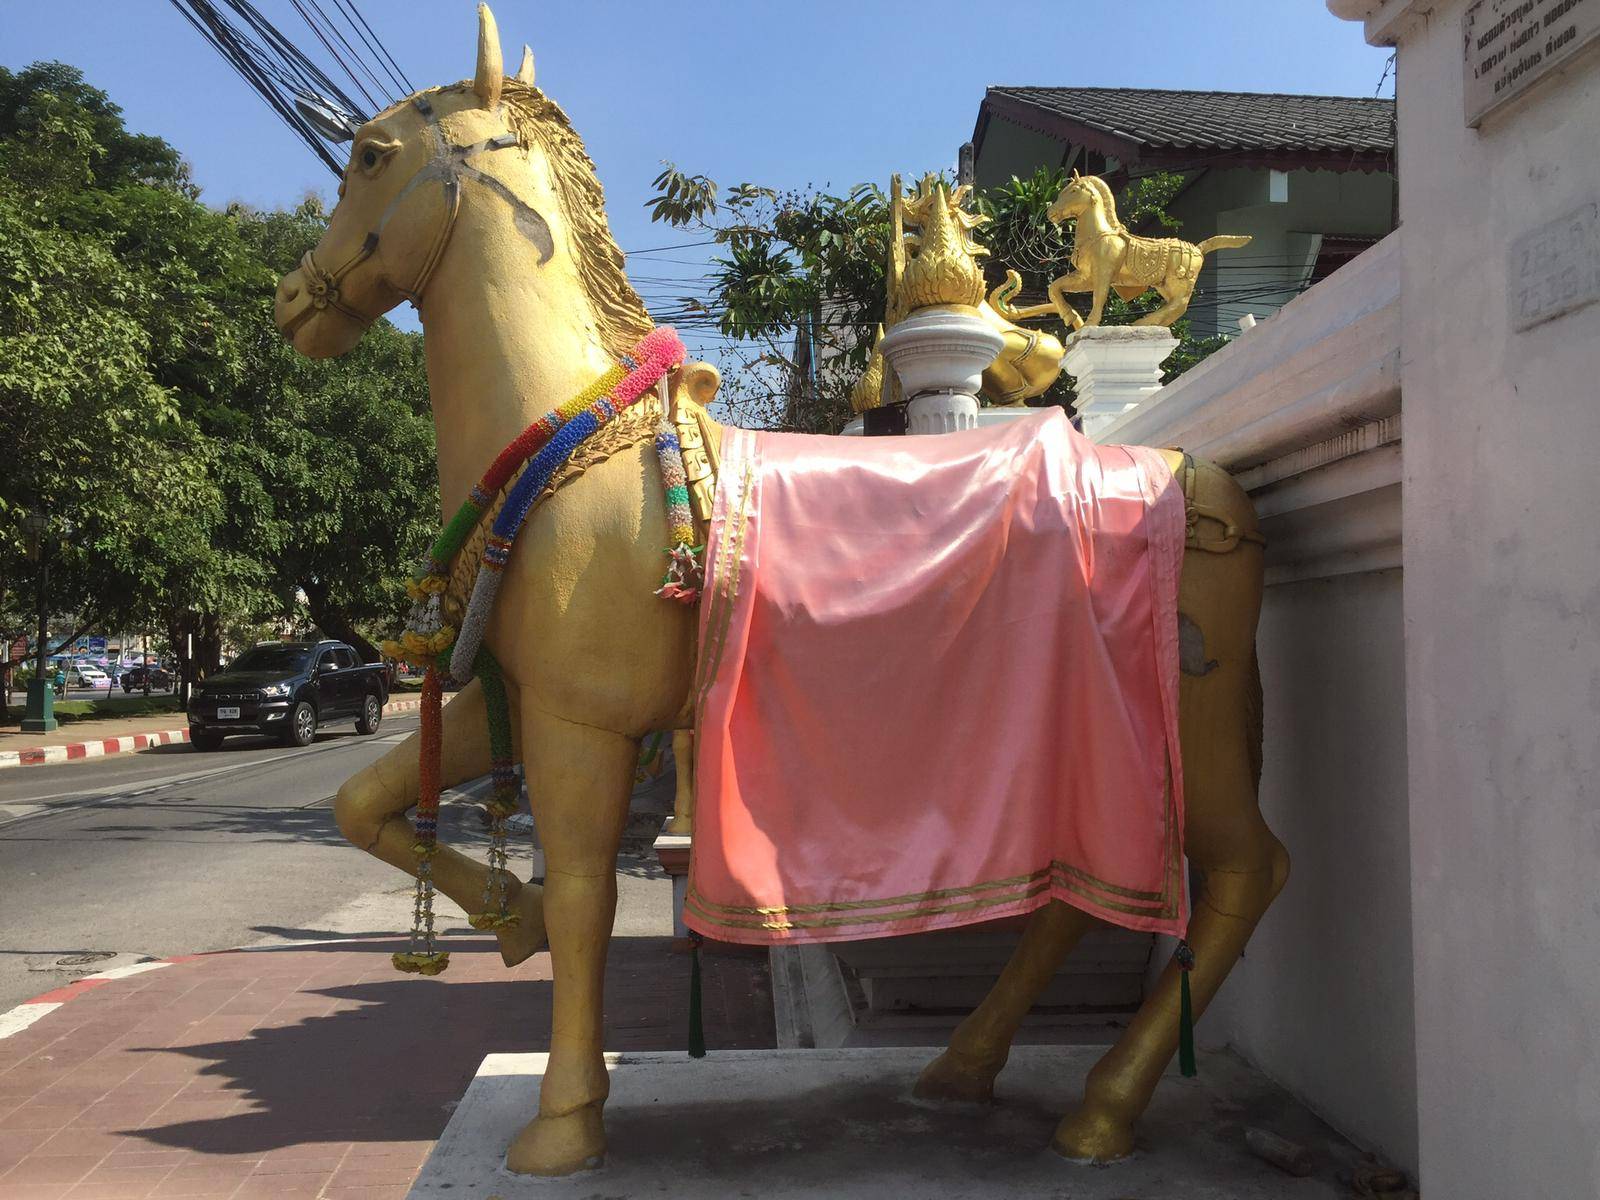 A horse statue right in front of the Wat Kuan Kama